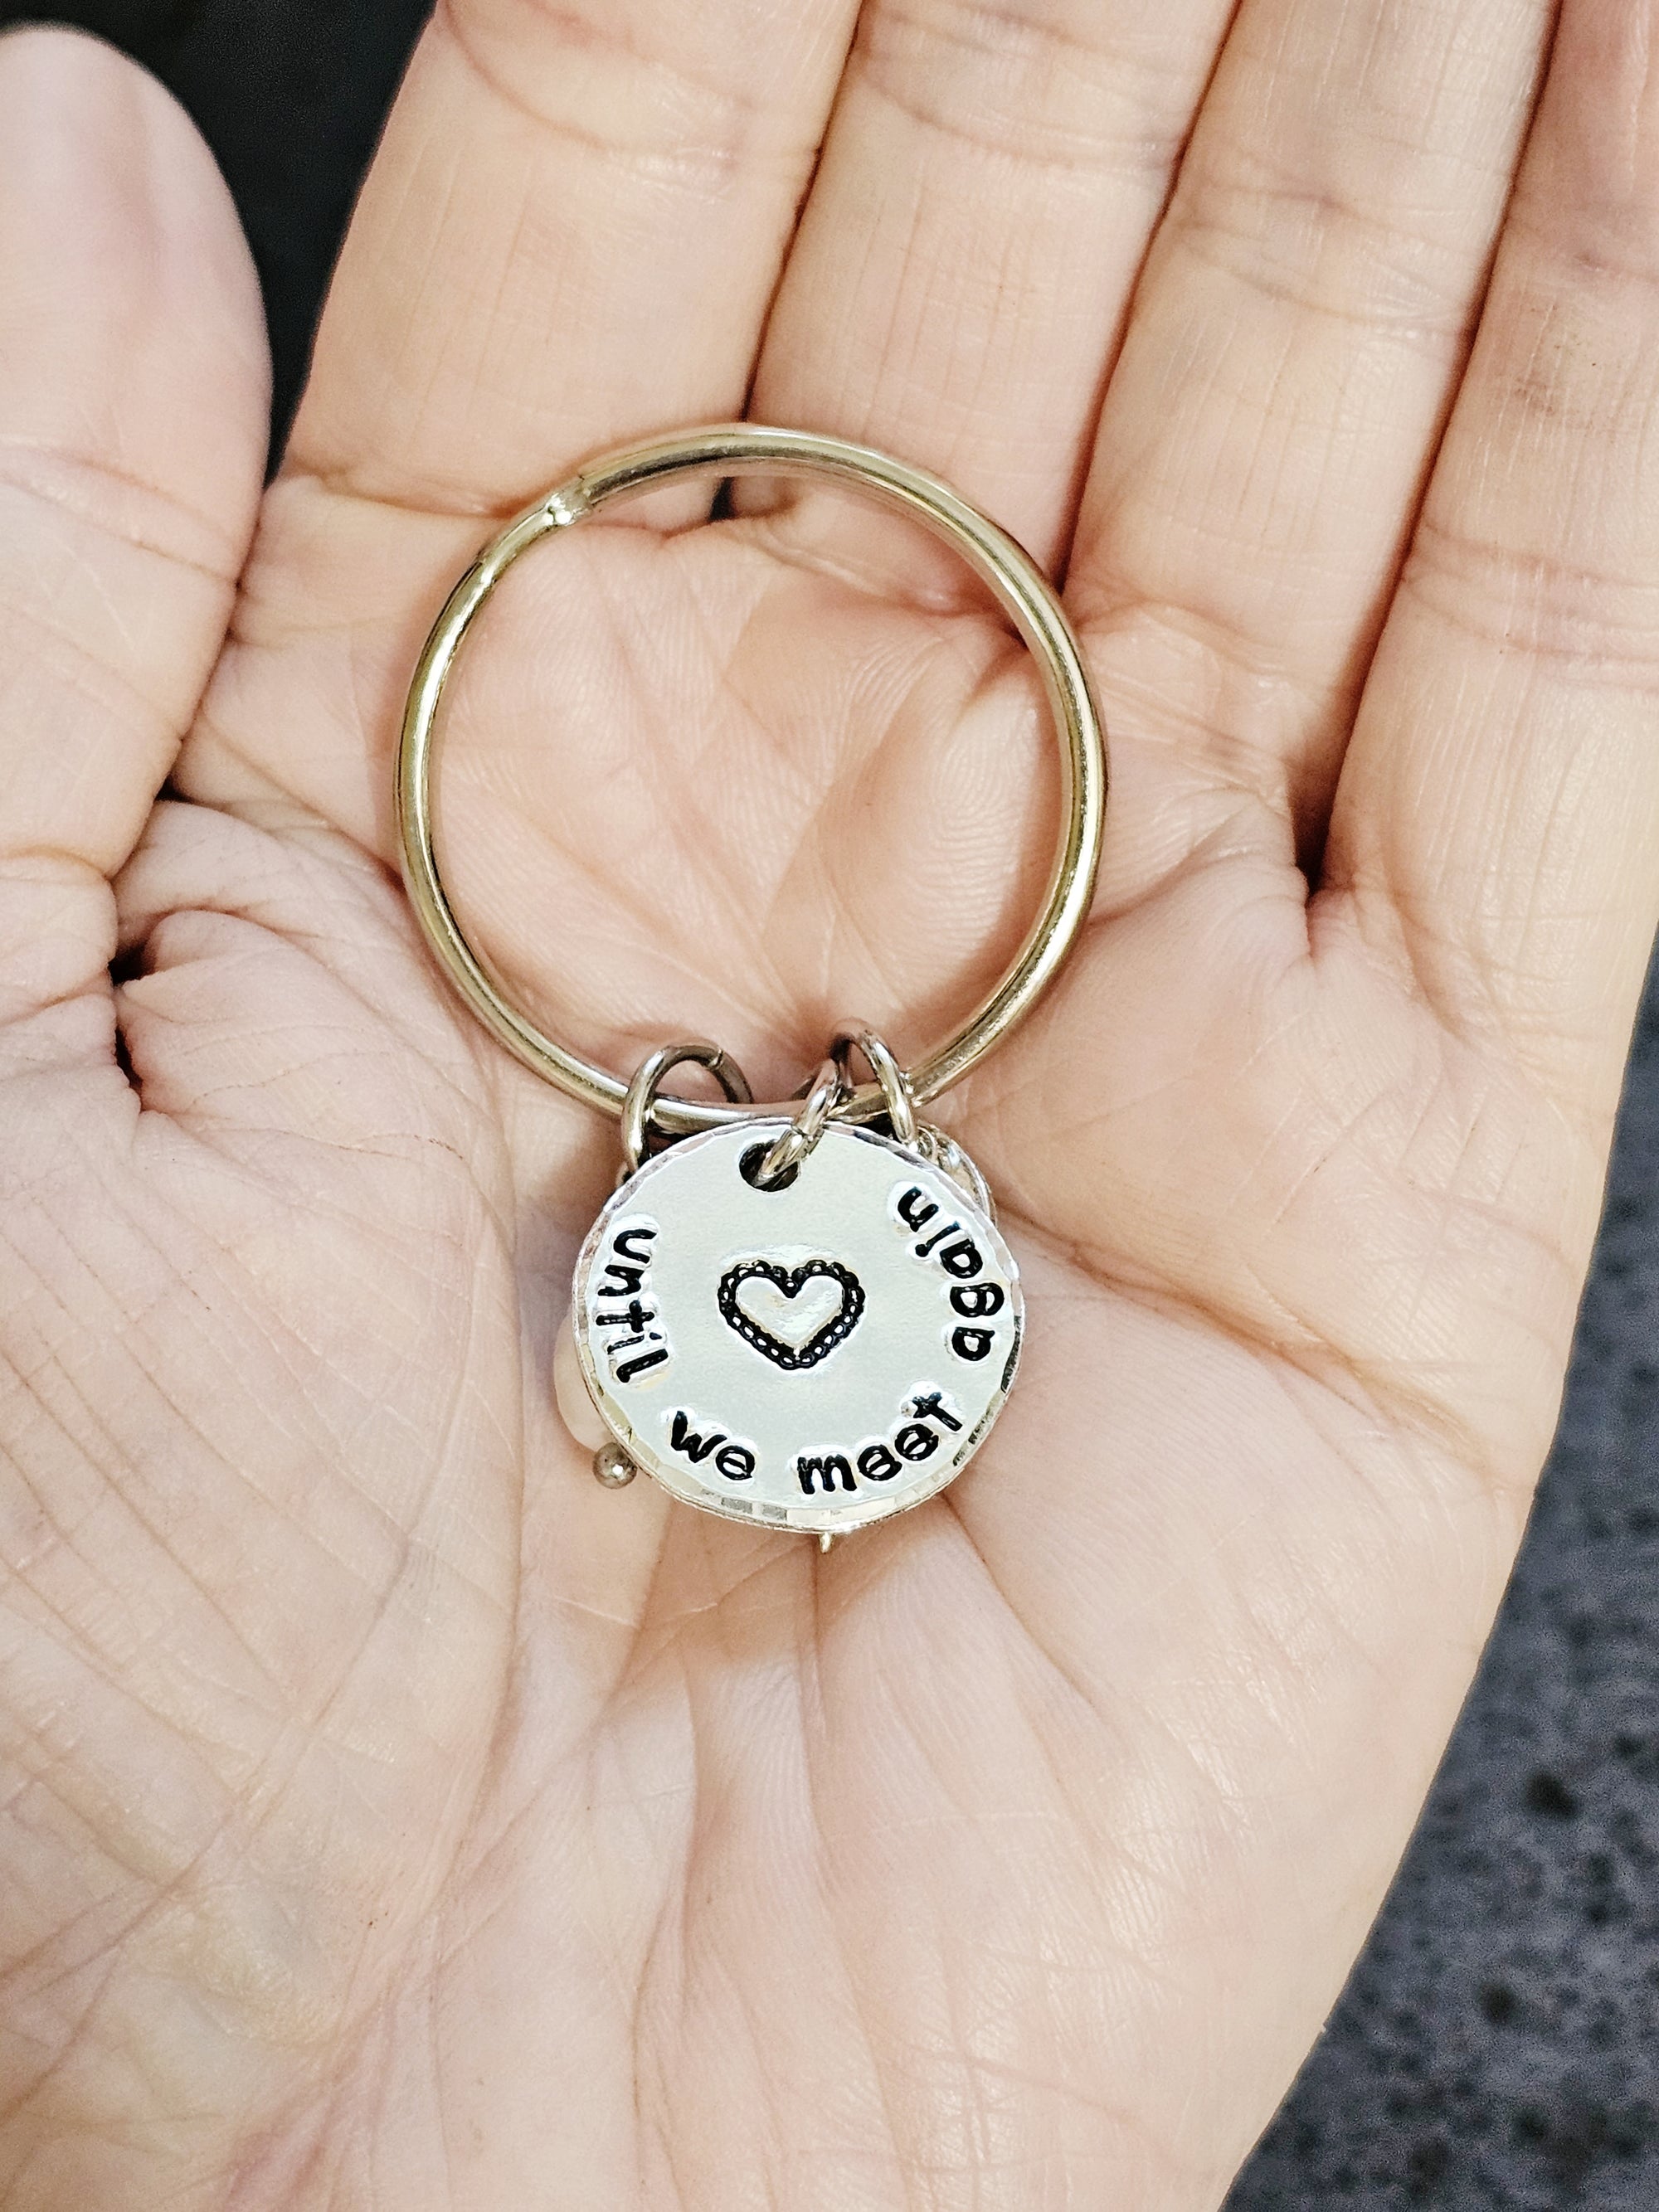 Until We Meet Again Memorial Keychain, Carry You With Me, Remembrance Jewelry, Hold You In My Heart, Hold You In Heaven